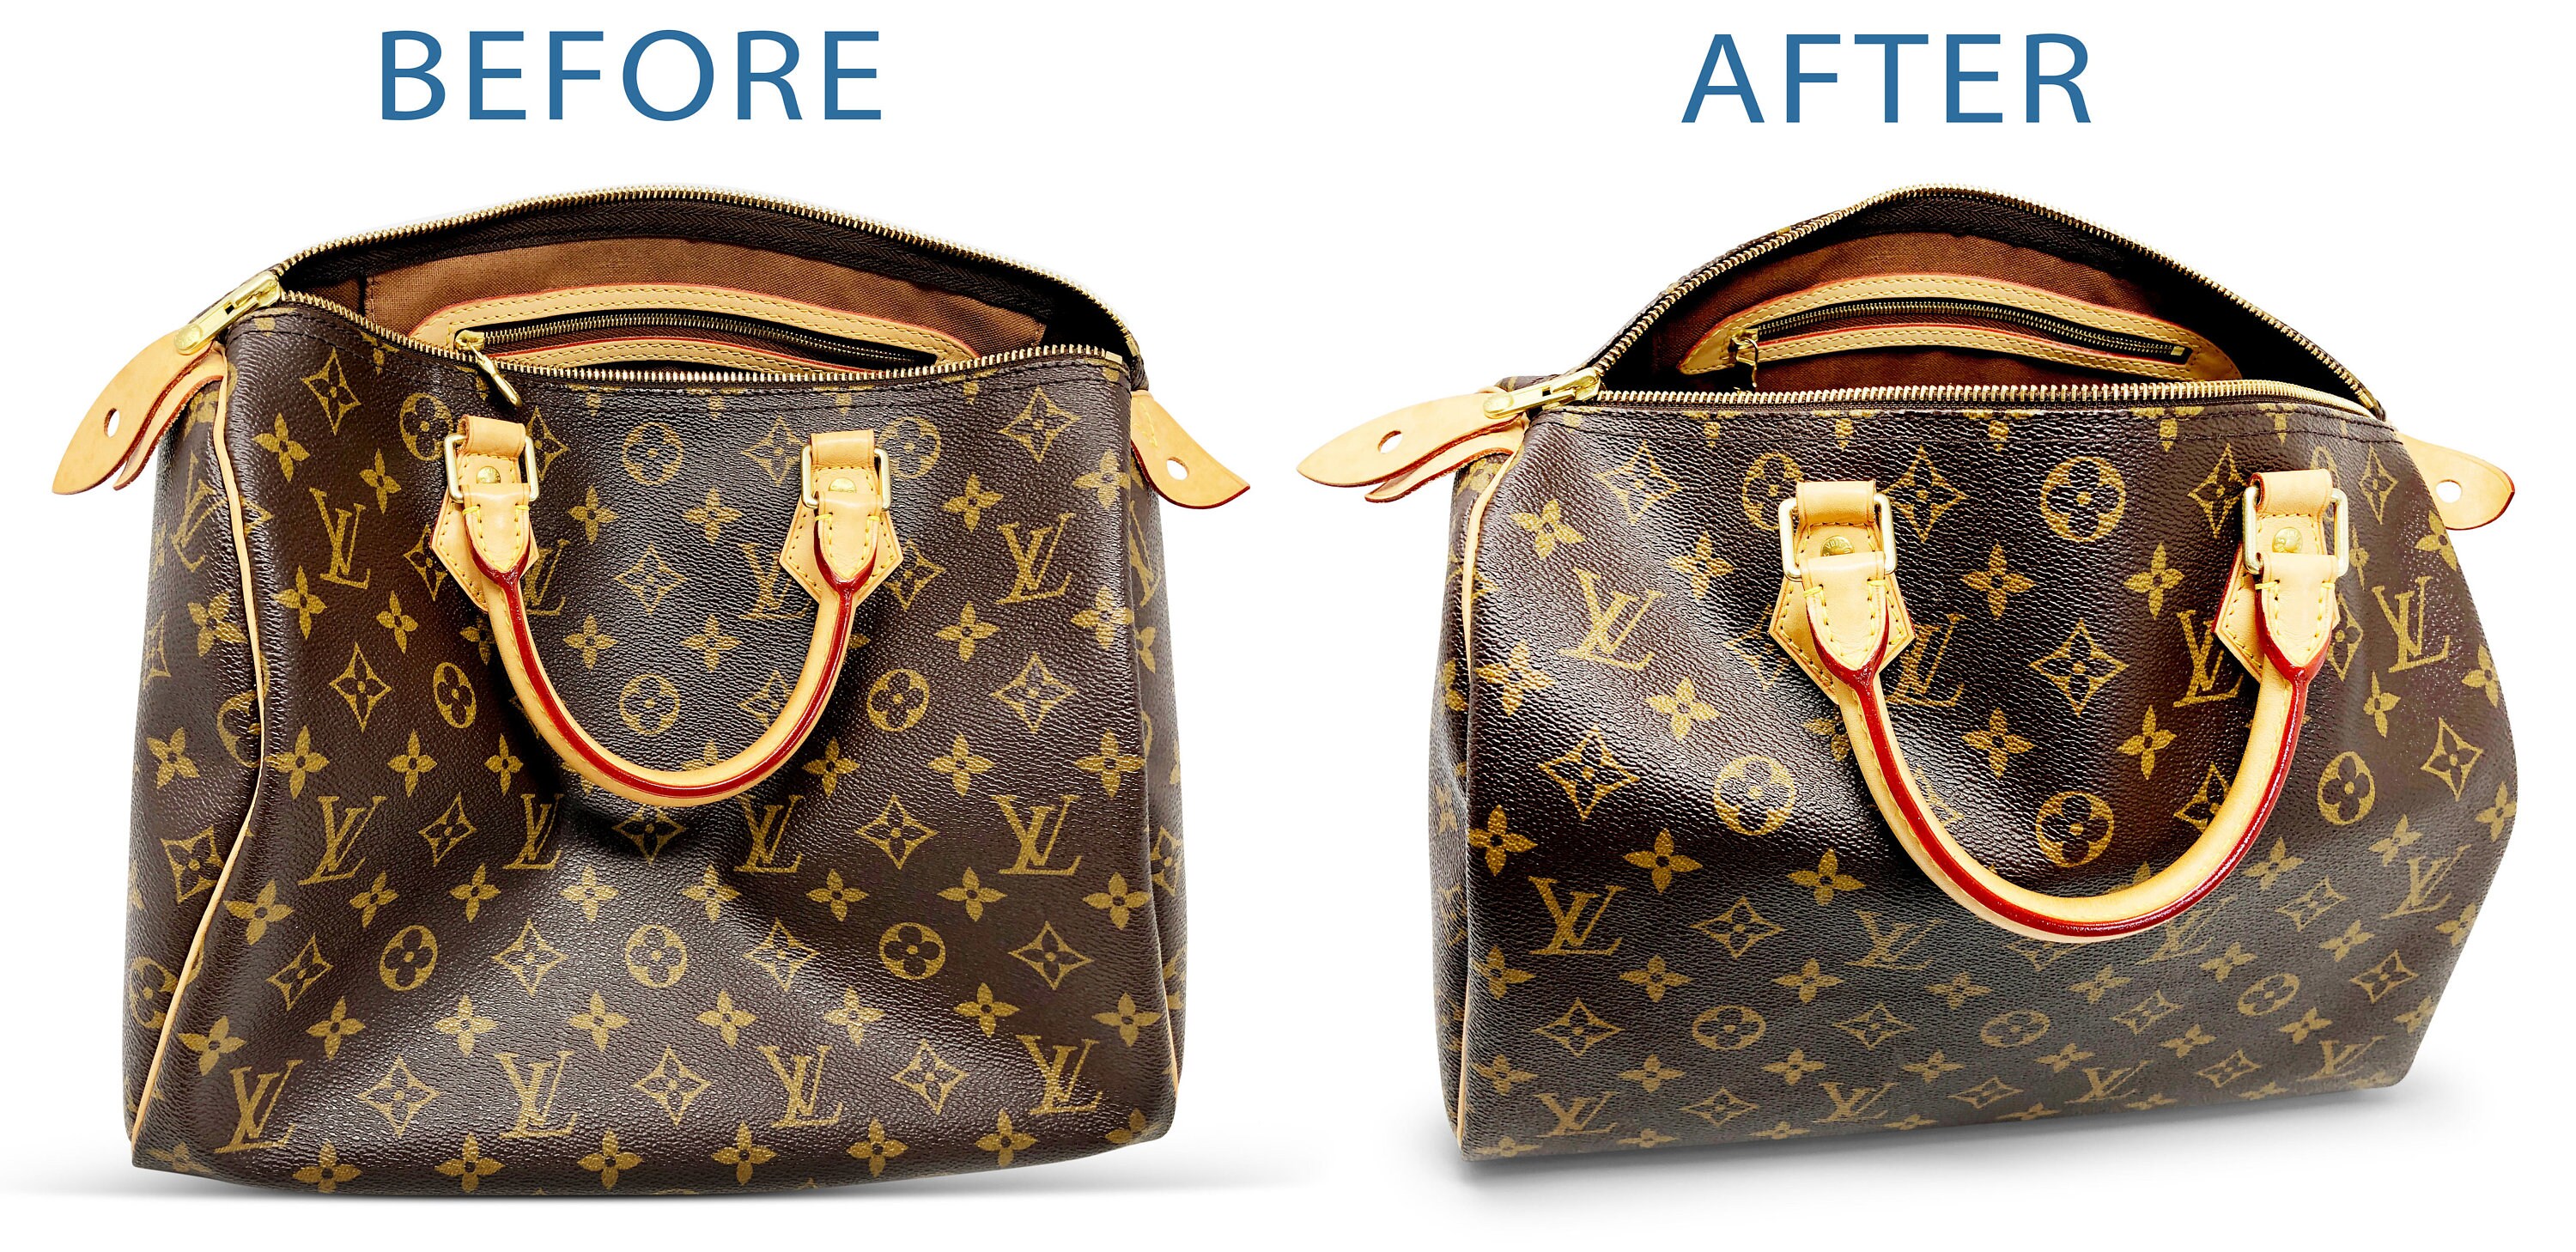 Buy BACK in Stock LV Neverfull NF Gm Mm Pm Purse Organizer Insert Online in  India 